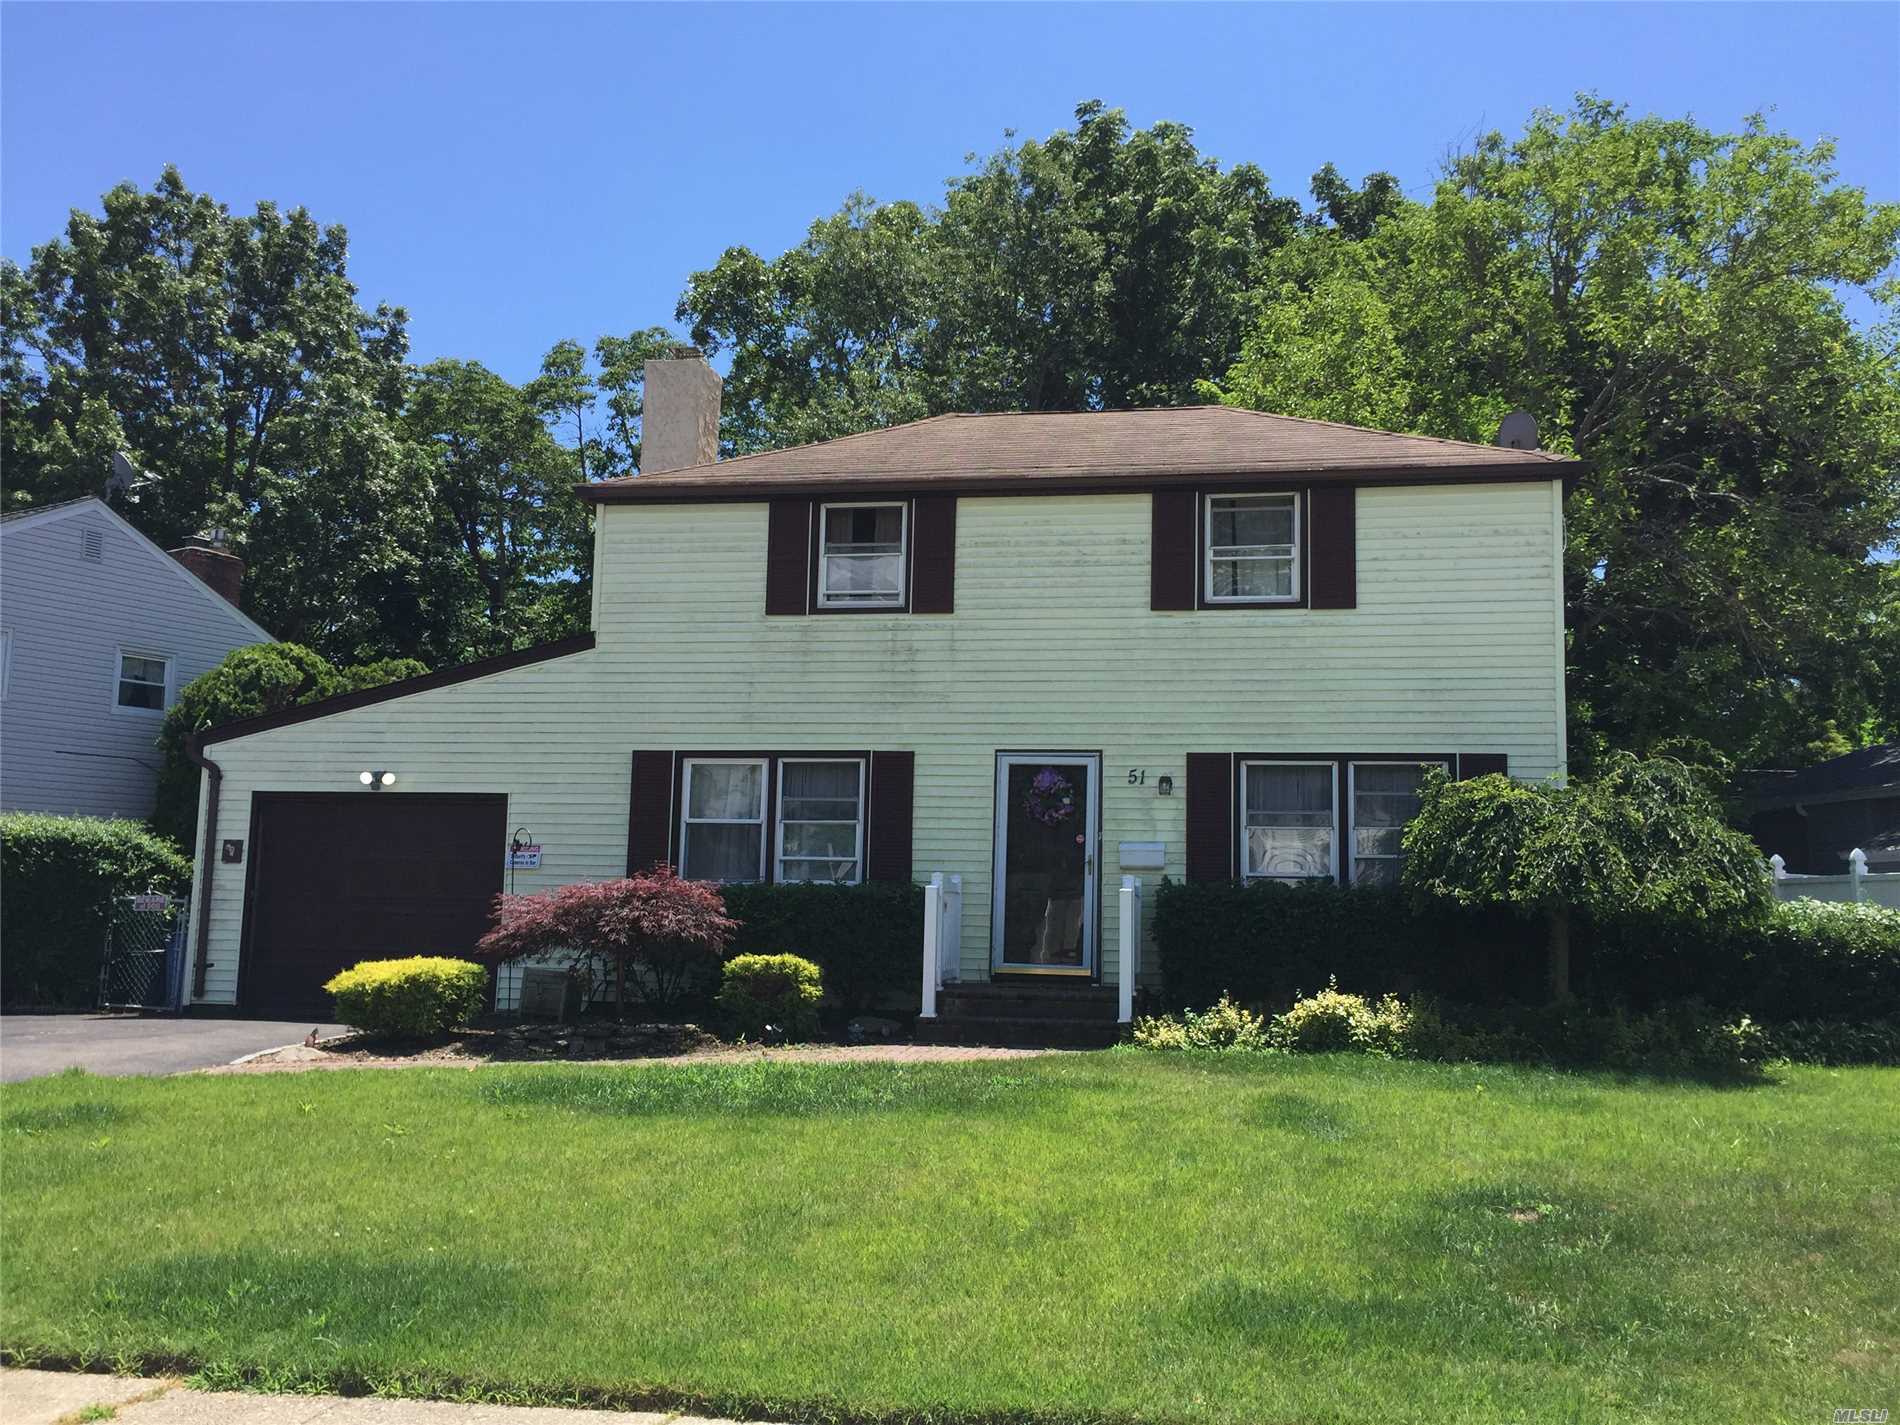 This Crest Colonial Is The Best Buy In The Area! Great Potential In A Wonderful Neighborhood! This Home Features An Extended Tv Room, Cac, Full Basement, Dryer Is Gas, New Electric Meter,  Chimney Recently Redone/Cement Work. Over Sized Property/ Irregular 89 X 100. Make This Home Your Own!